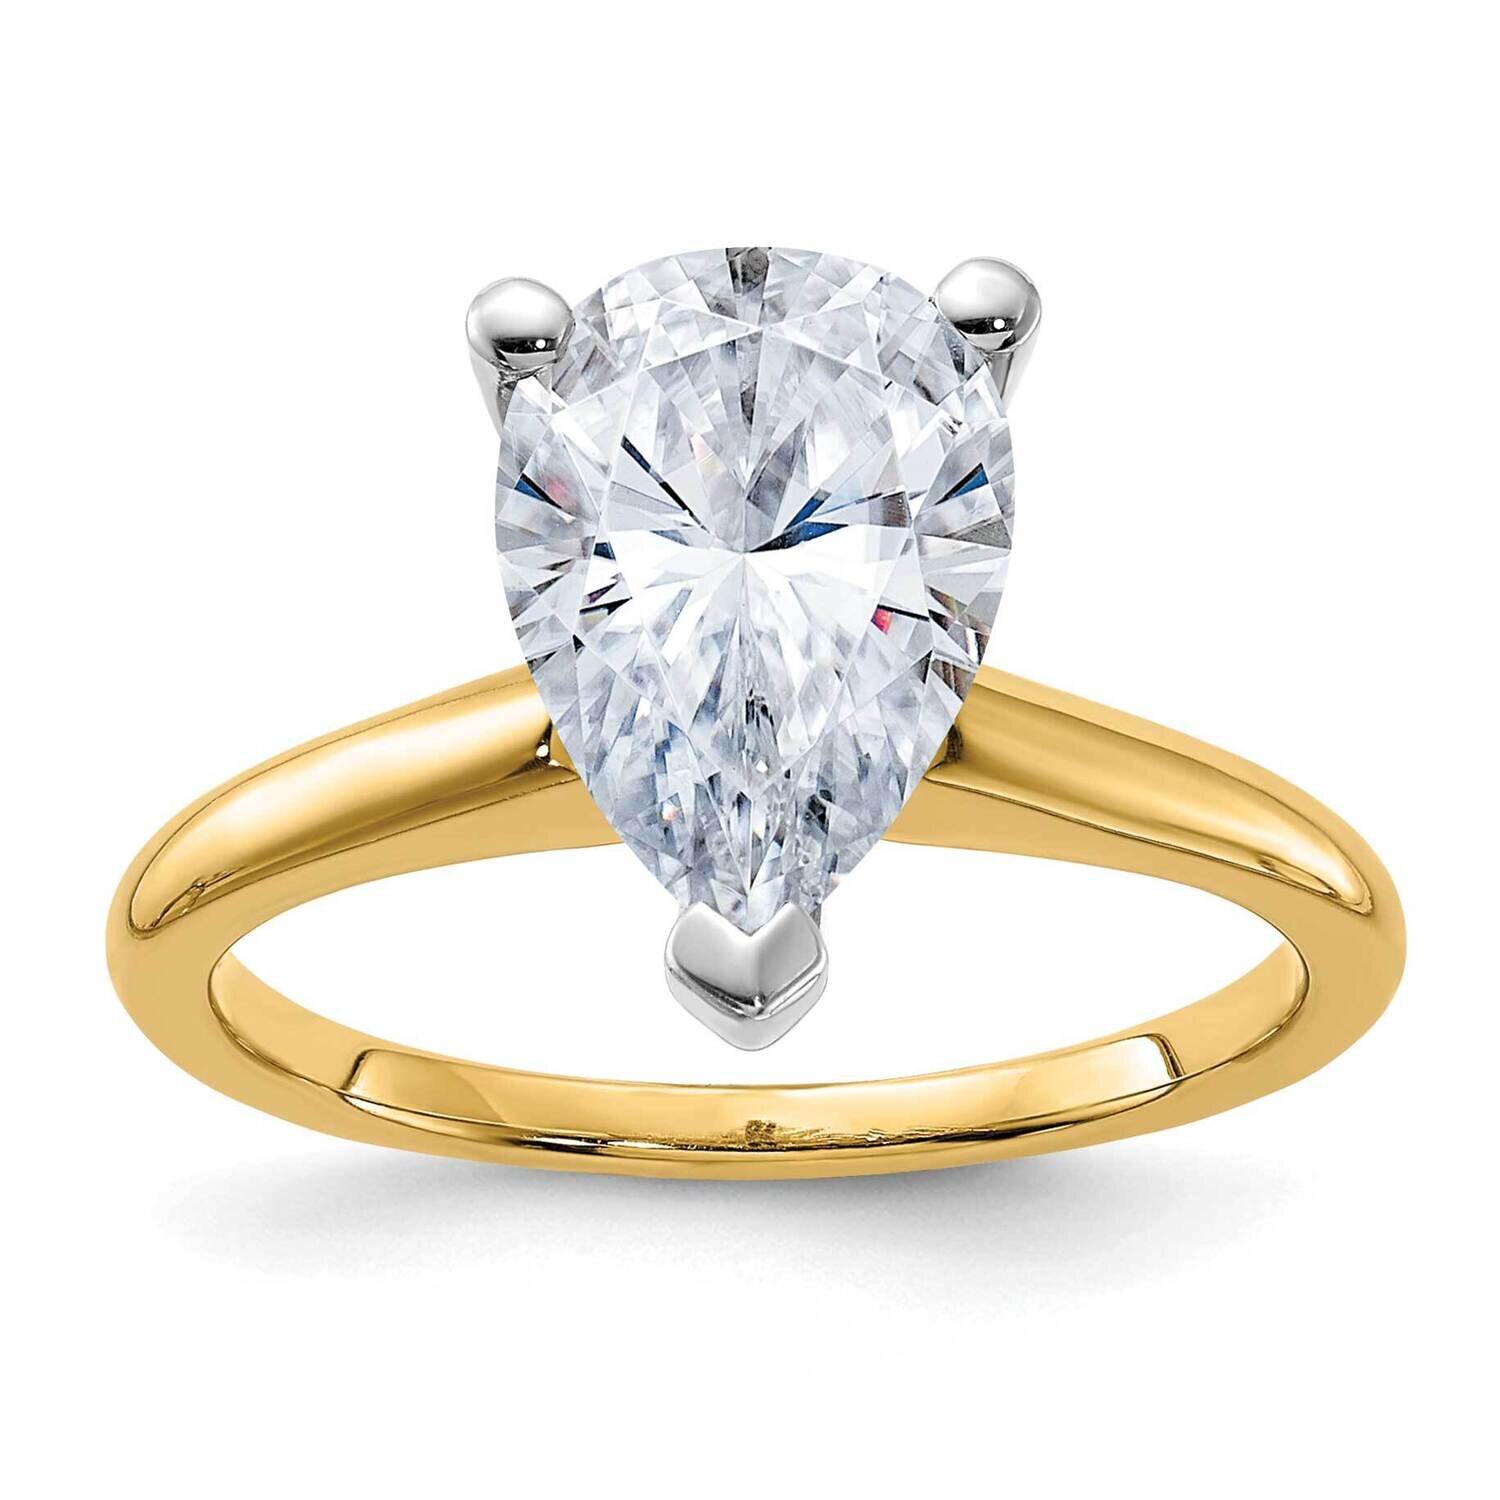 3 1/2ct. D E F Pure Light Pear Moissanite Solitaire Ring 14k Two Tone Gold RM5965P-300-6MP